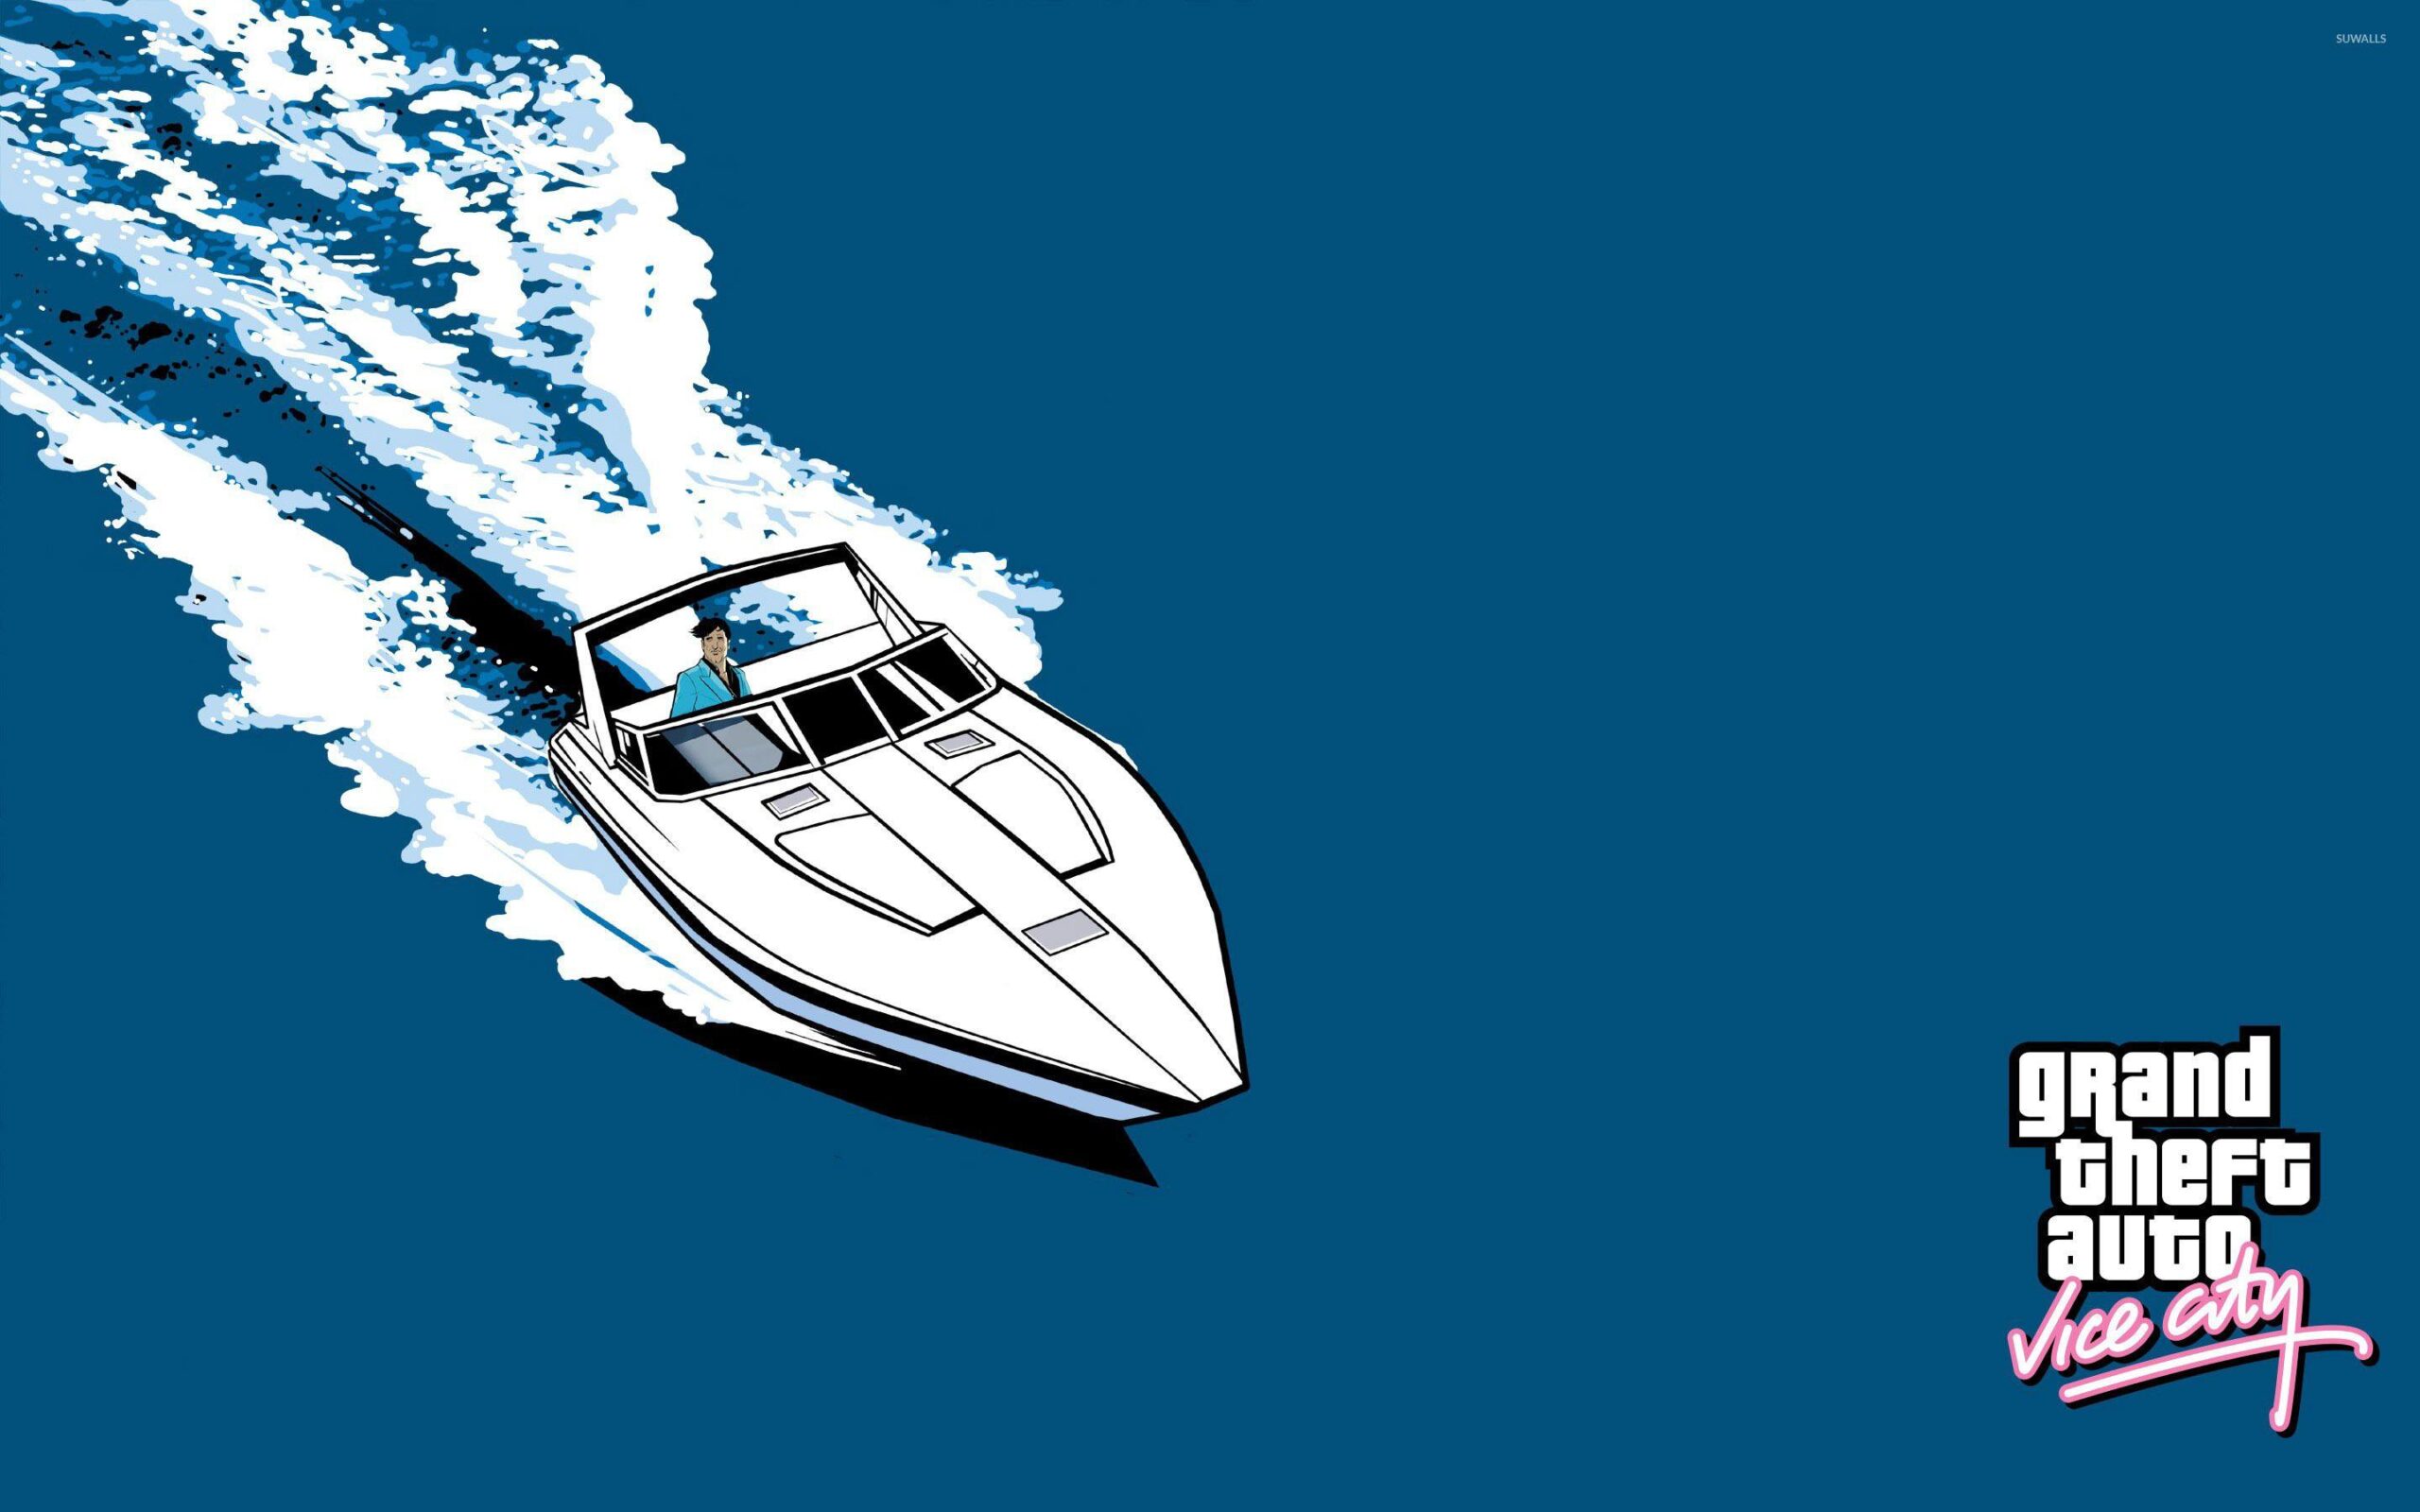 Yacht ride in Grand Theft Auto: Vice City wallpapers